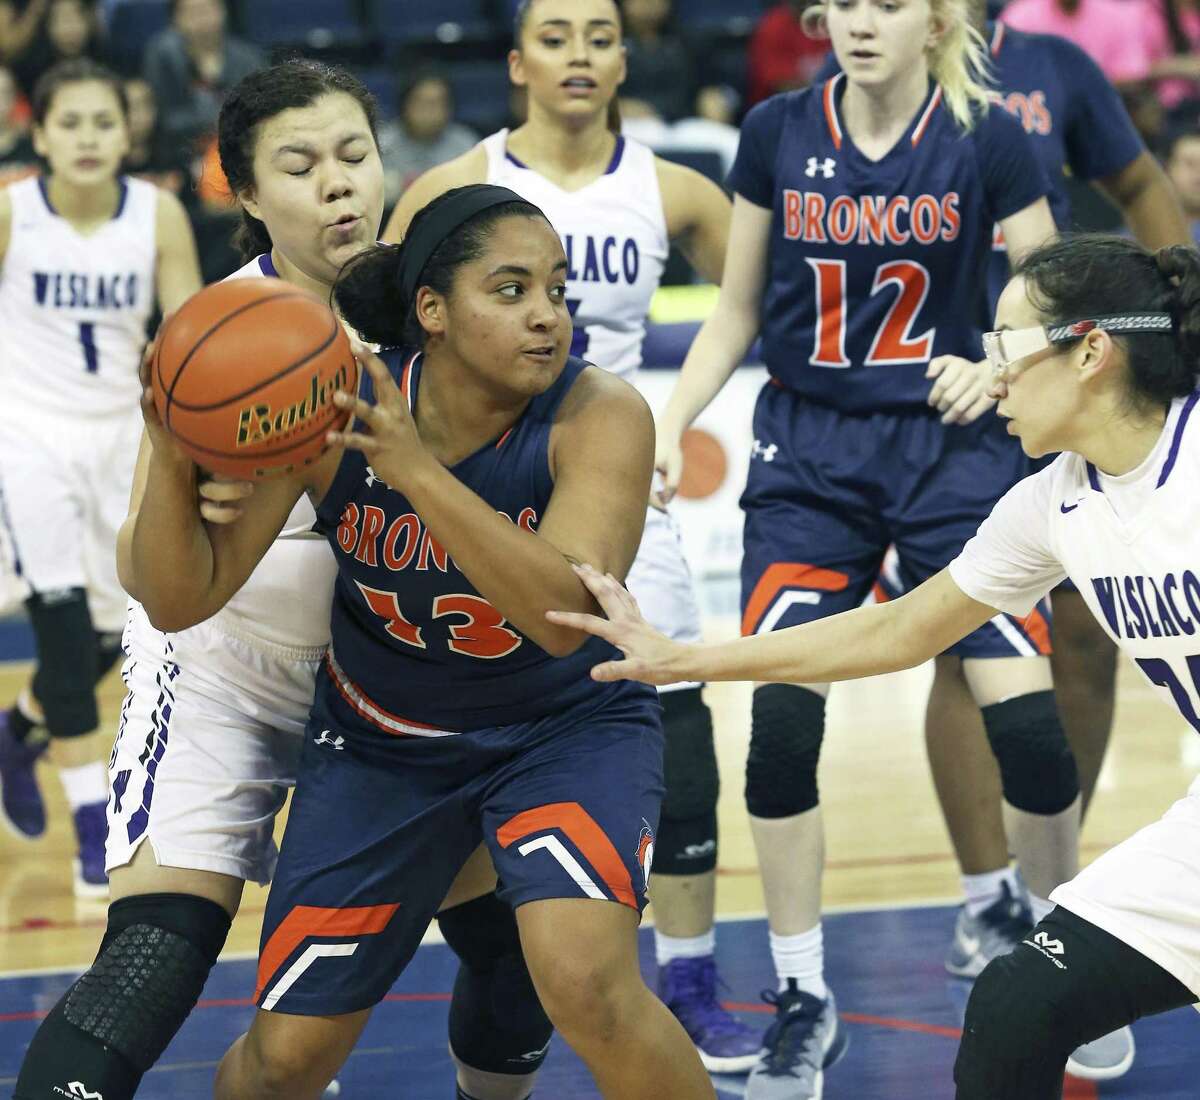 Bronco forward Denay Griffin powers out of the lane with a defensive rebound as Brandeis plays Weslaco at the Laredo Energy Arena in the Region IV-6A semifinals of girls basketball on February 24, 2017.